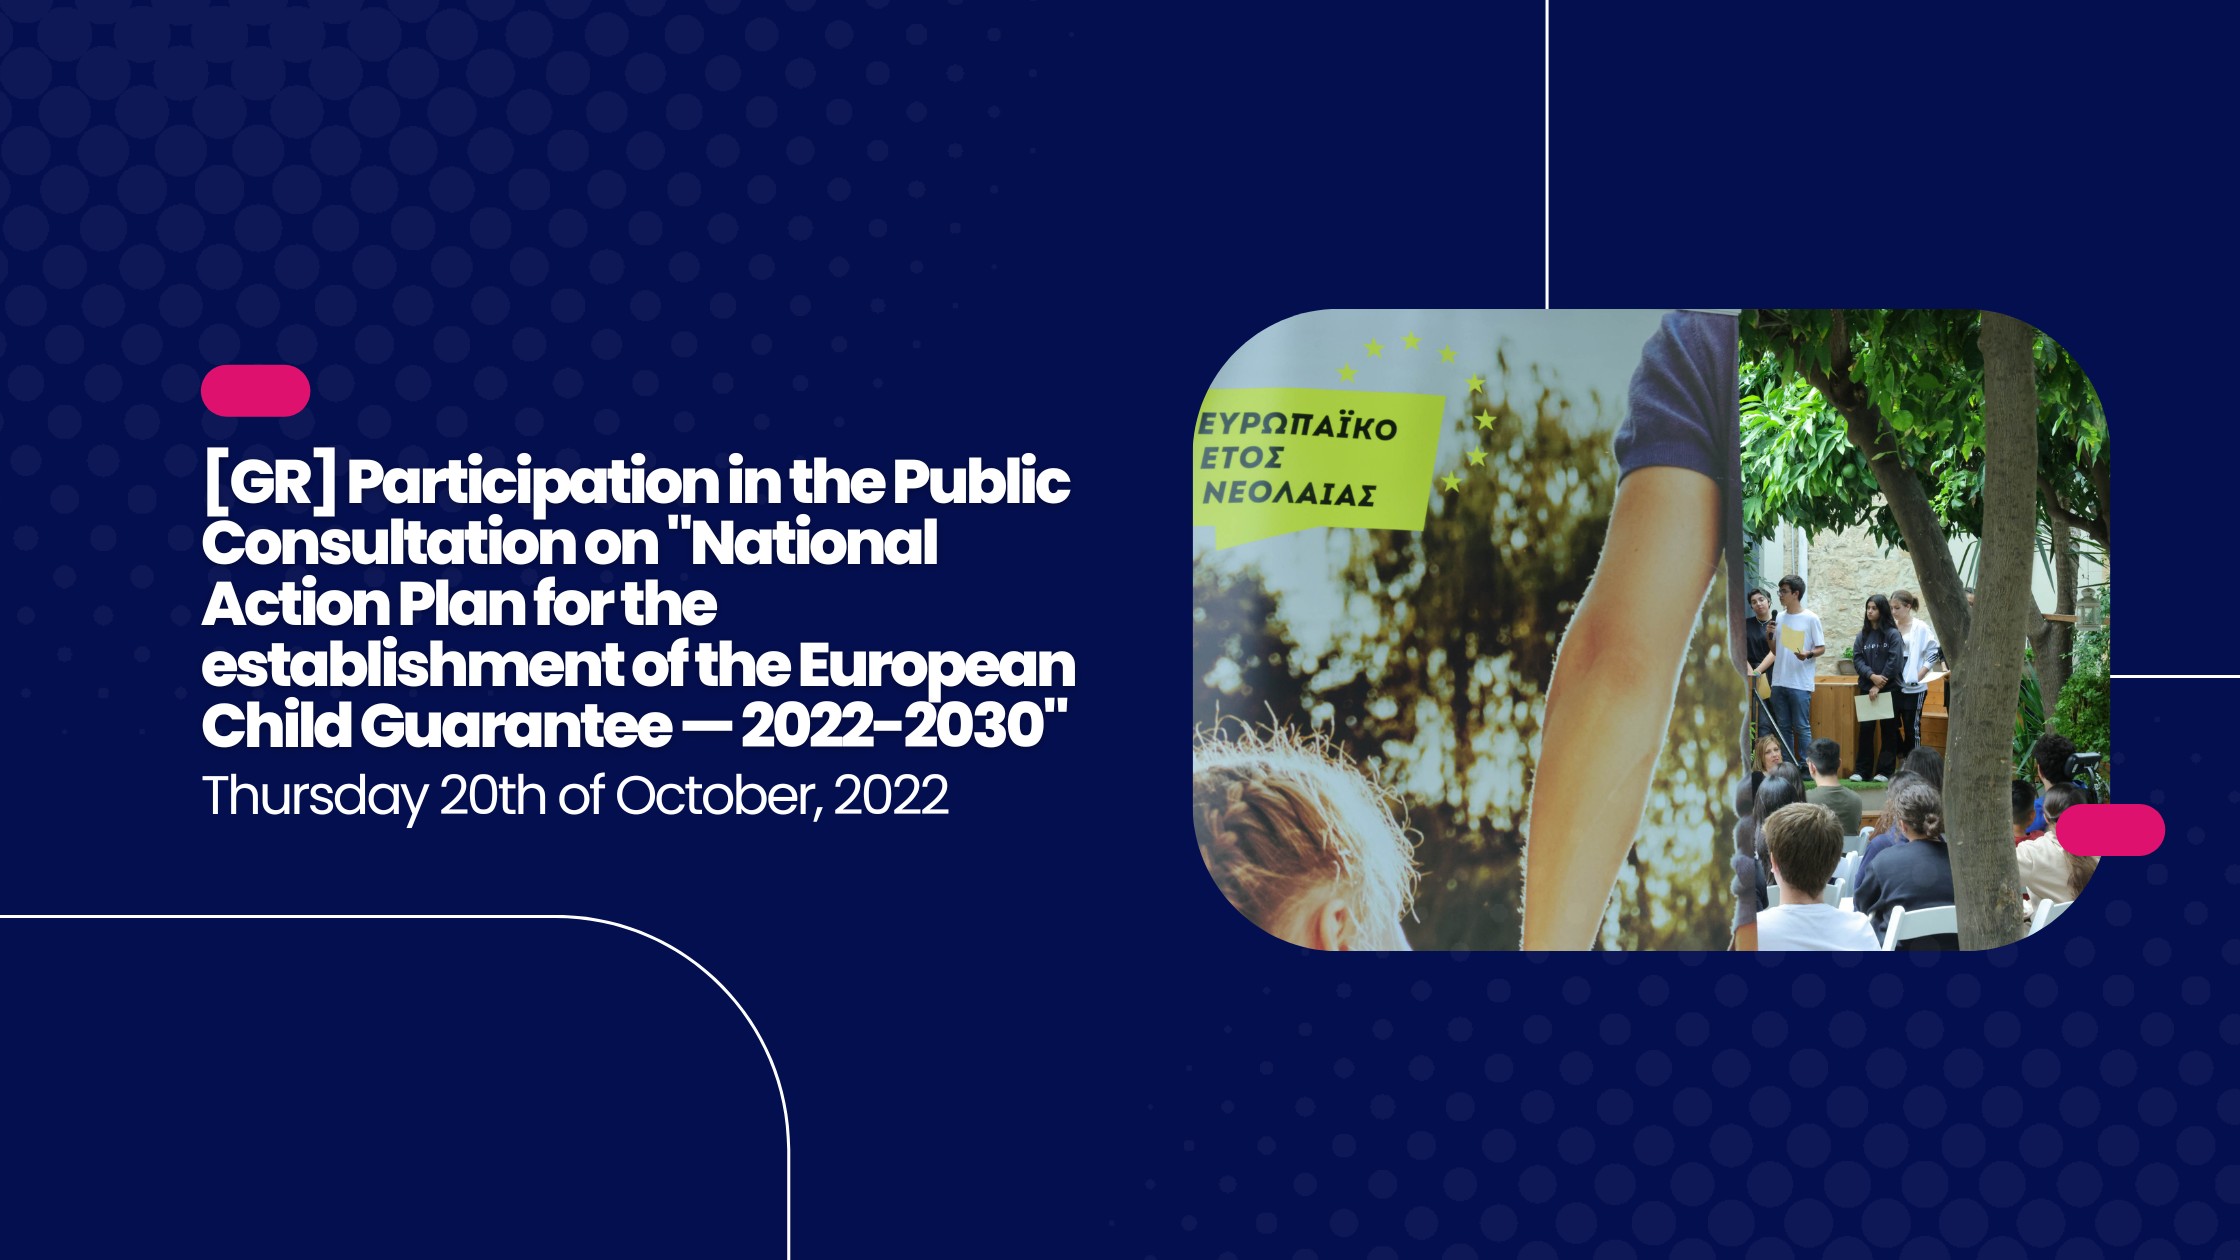 [GR] Participation in the Public Consultation on “National Action Plan for the establishment of the European Guarantee for Children — 2022-2030”